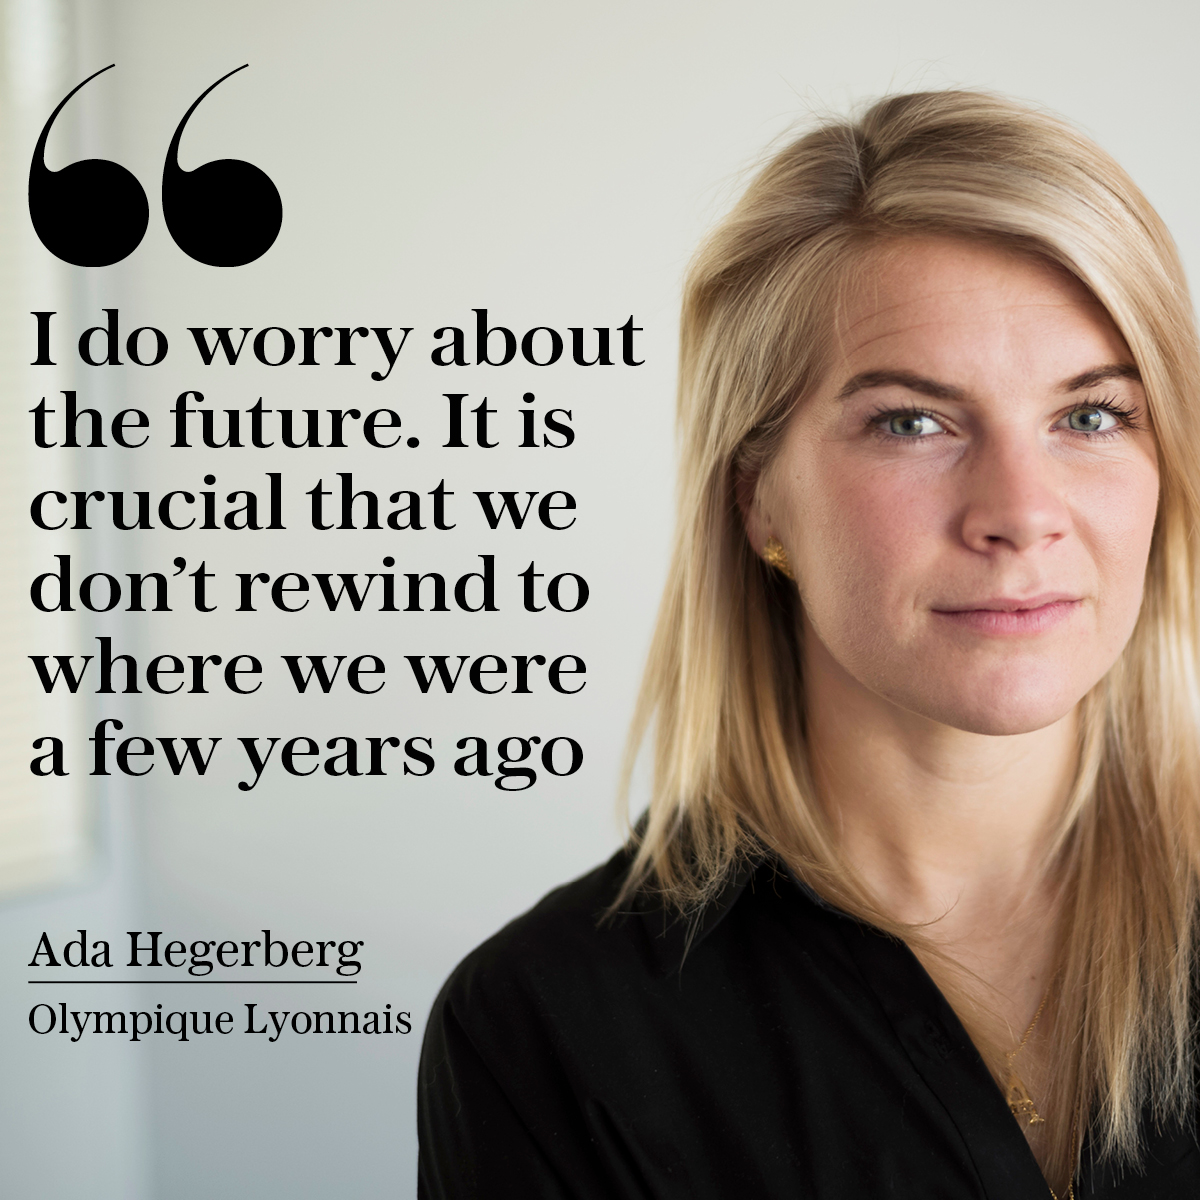 Generations of sportswomen have been at the forefront of change and  @AdaStolsmo calls on football's authorities to step forward and protect the women's game.  https://www.telegraph.co.uk/football/2020/04/23/ada-hegerberg-exclusive-interview-went-sadness-anger-incomprehension/